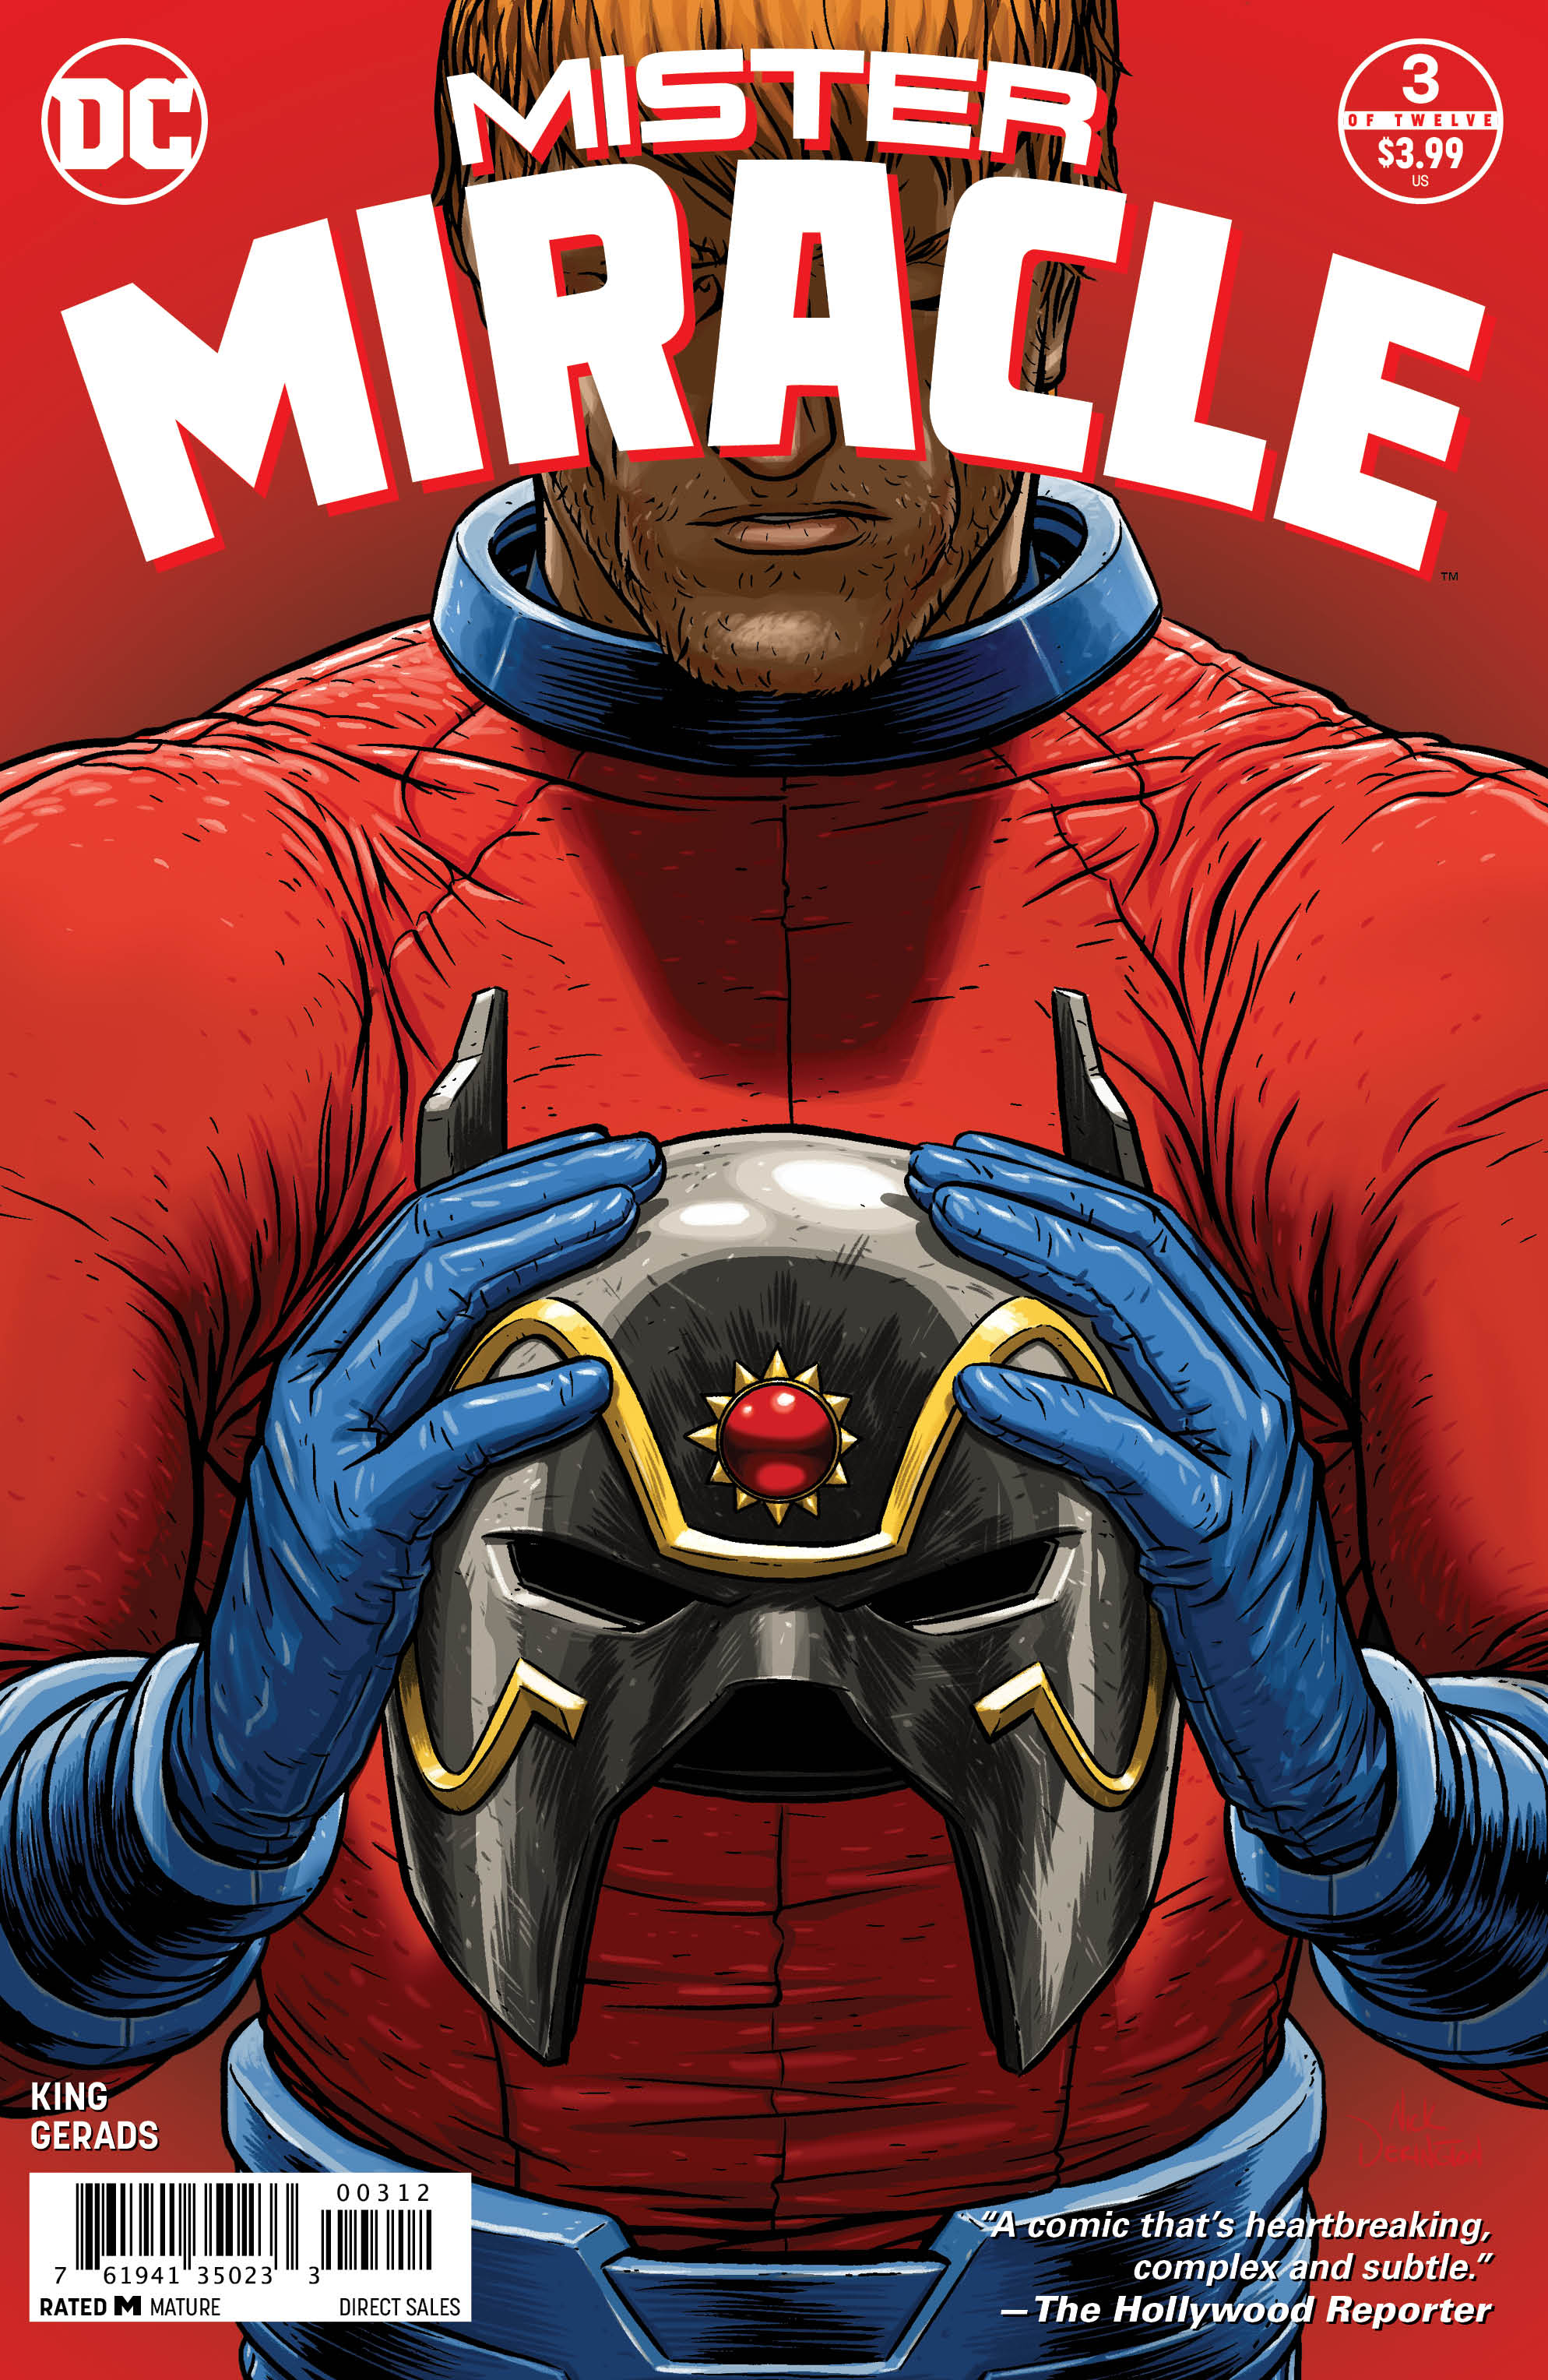 MISTER MIRACLE #3 (OF 12) 2ND PTG (MR)